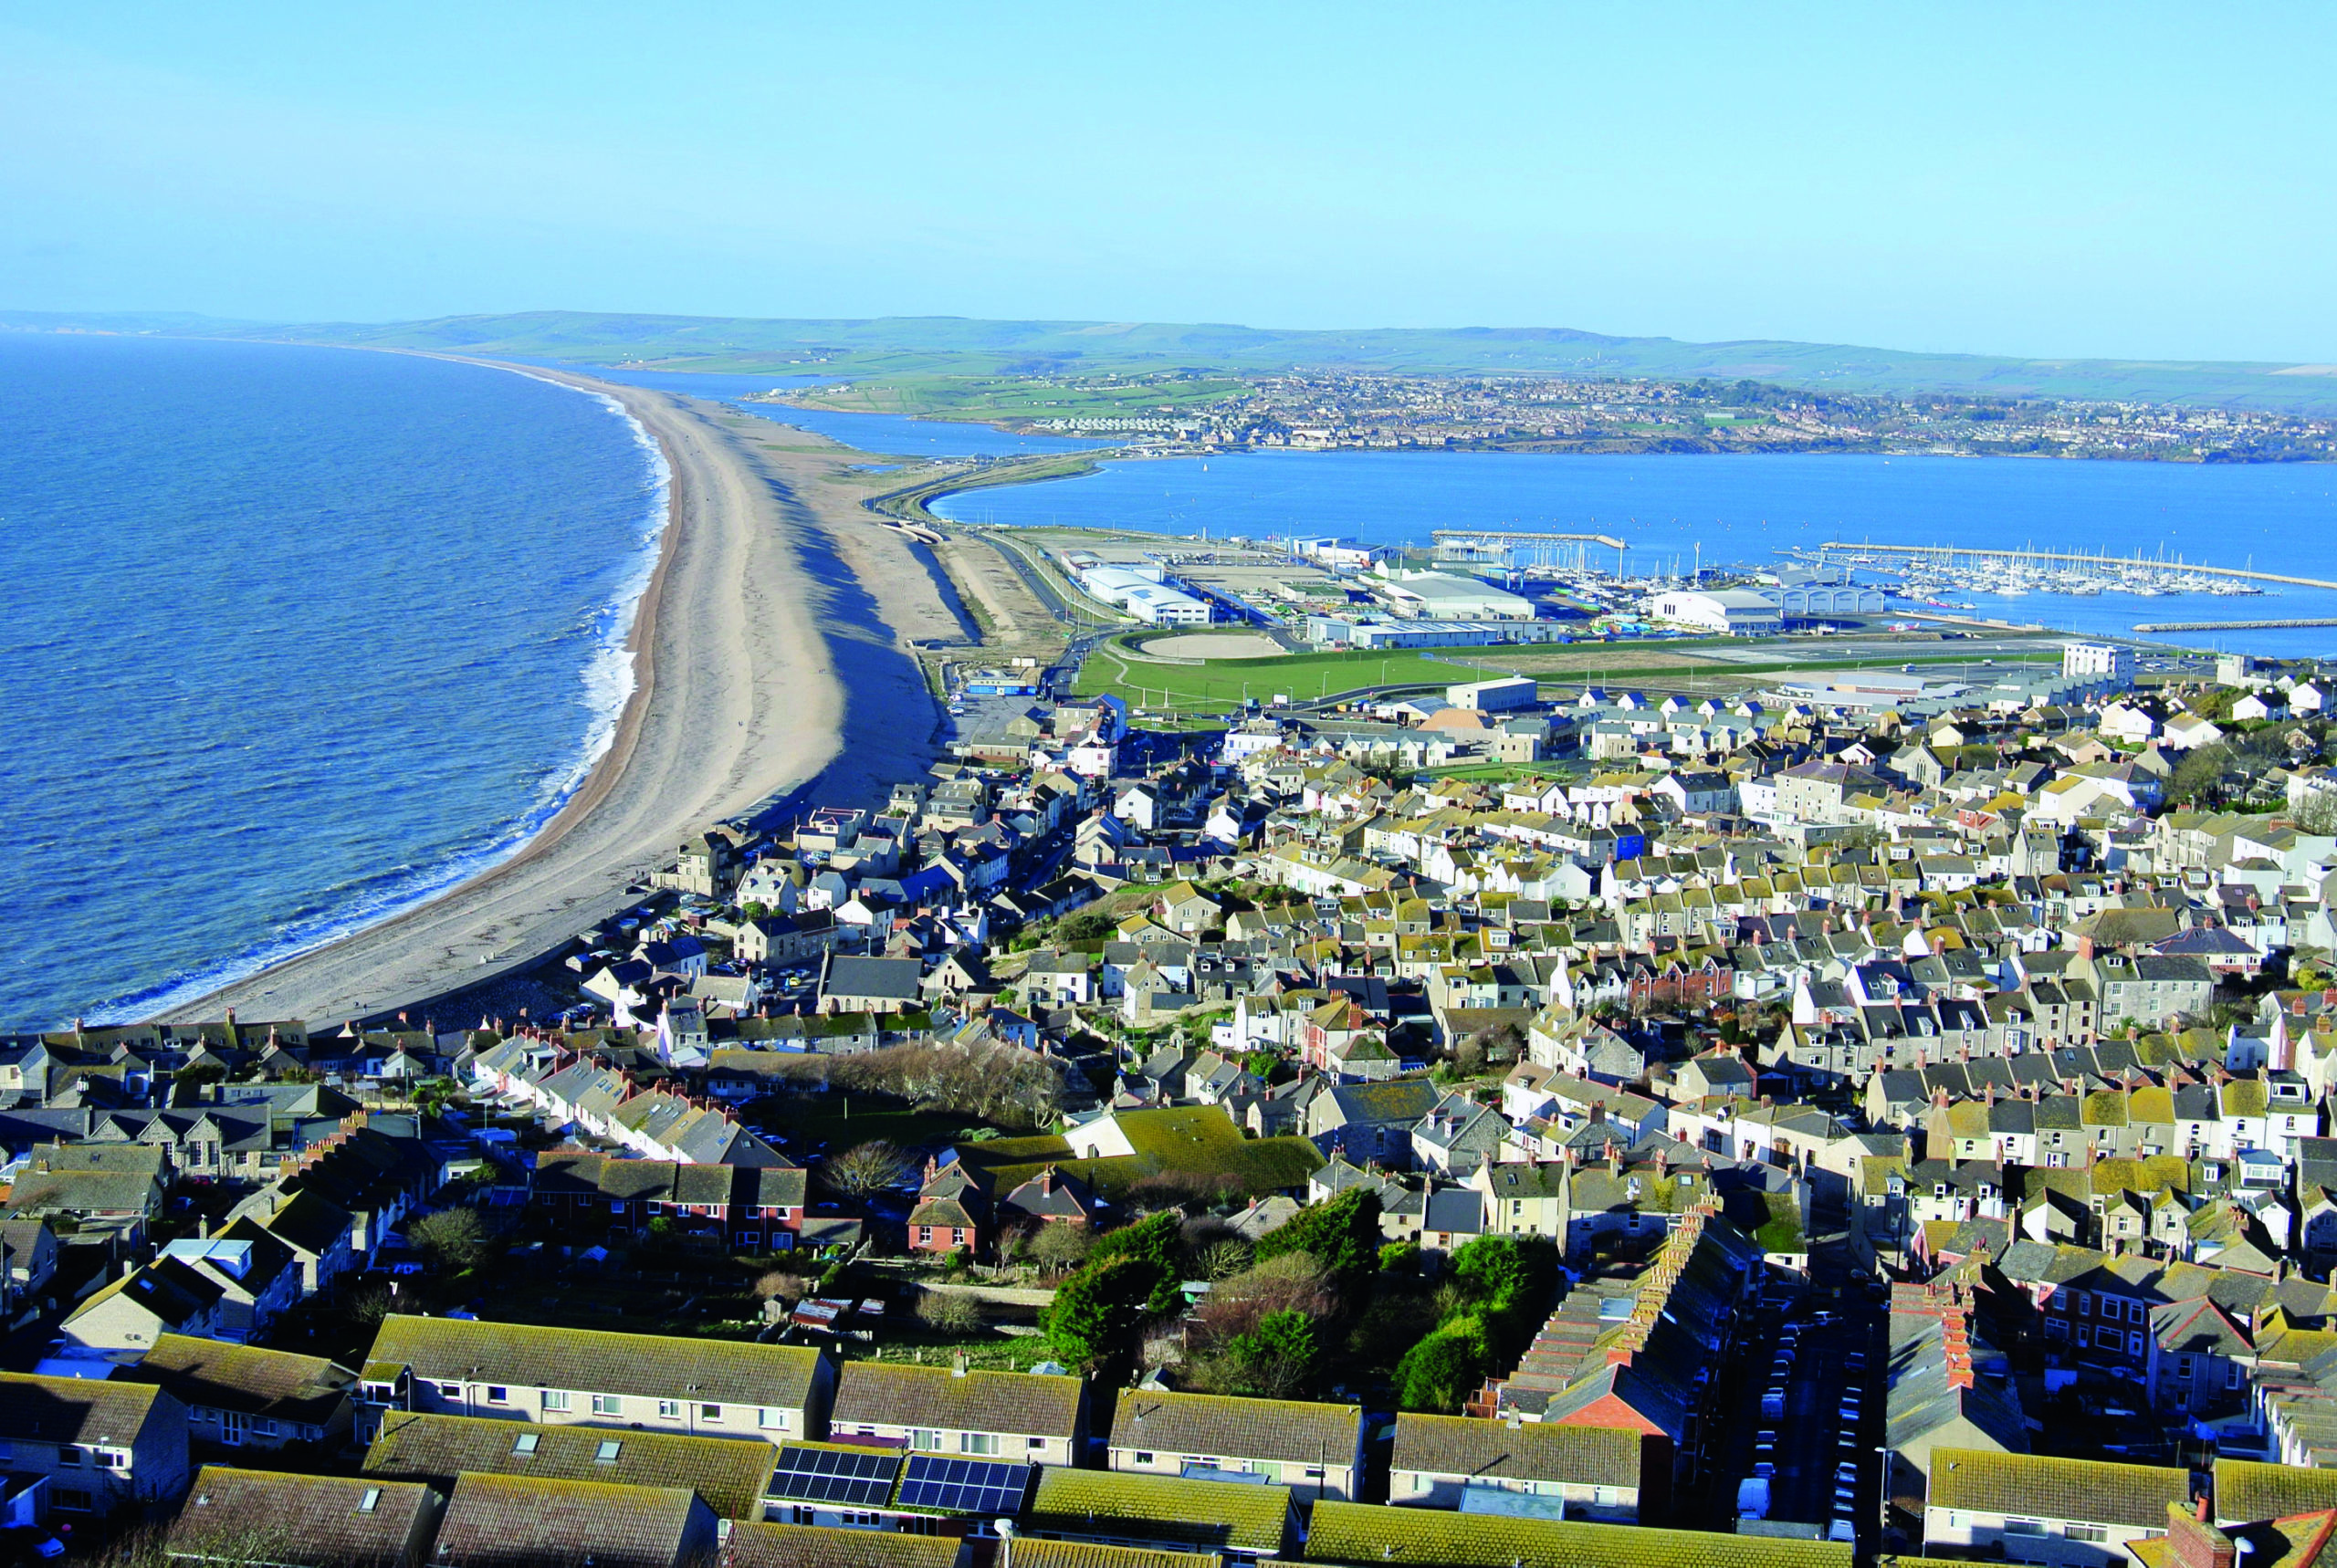 Chesil Beach - Visitor Centre, cafe and car parking info